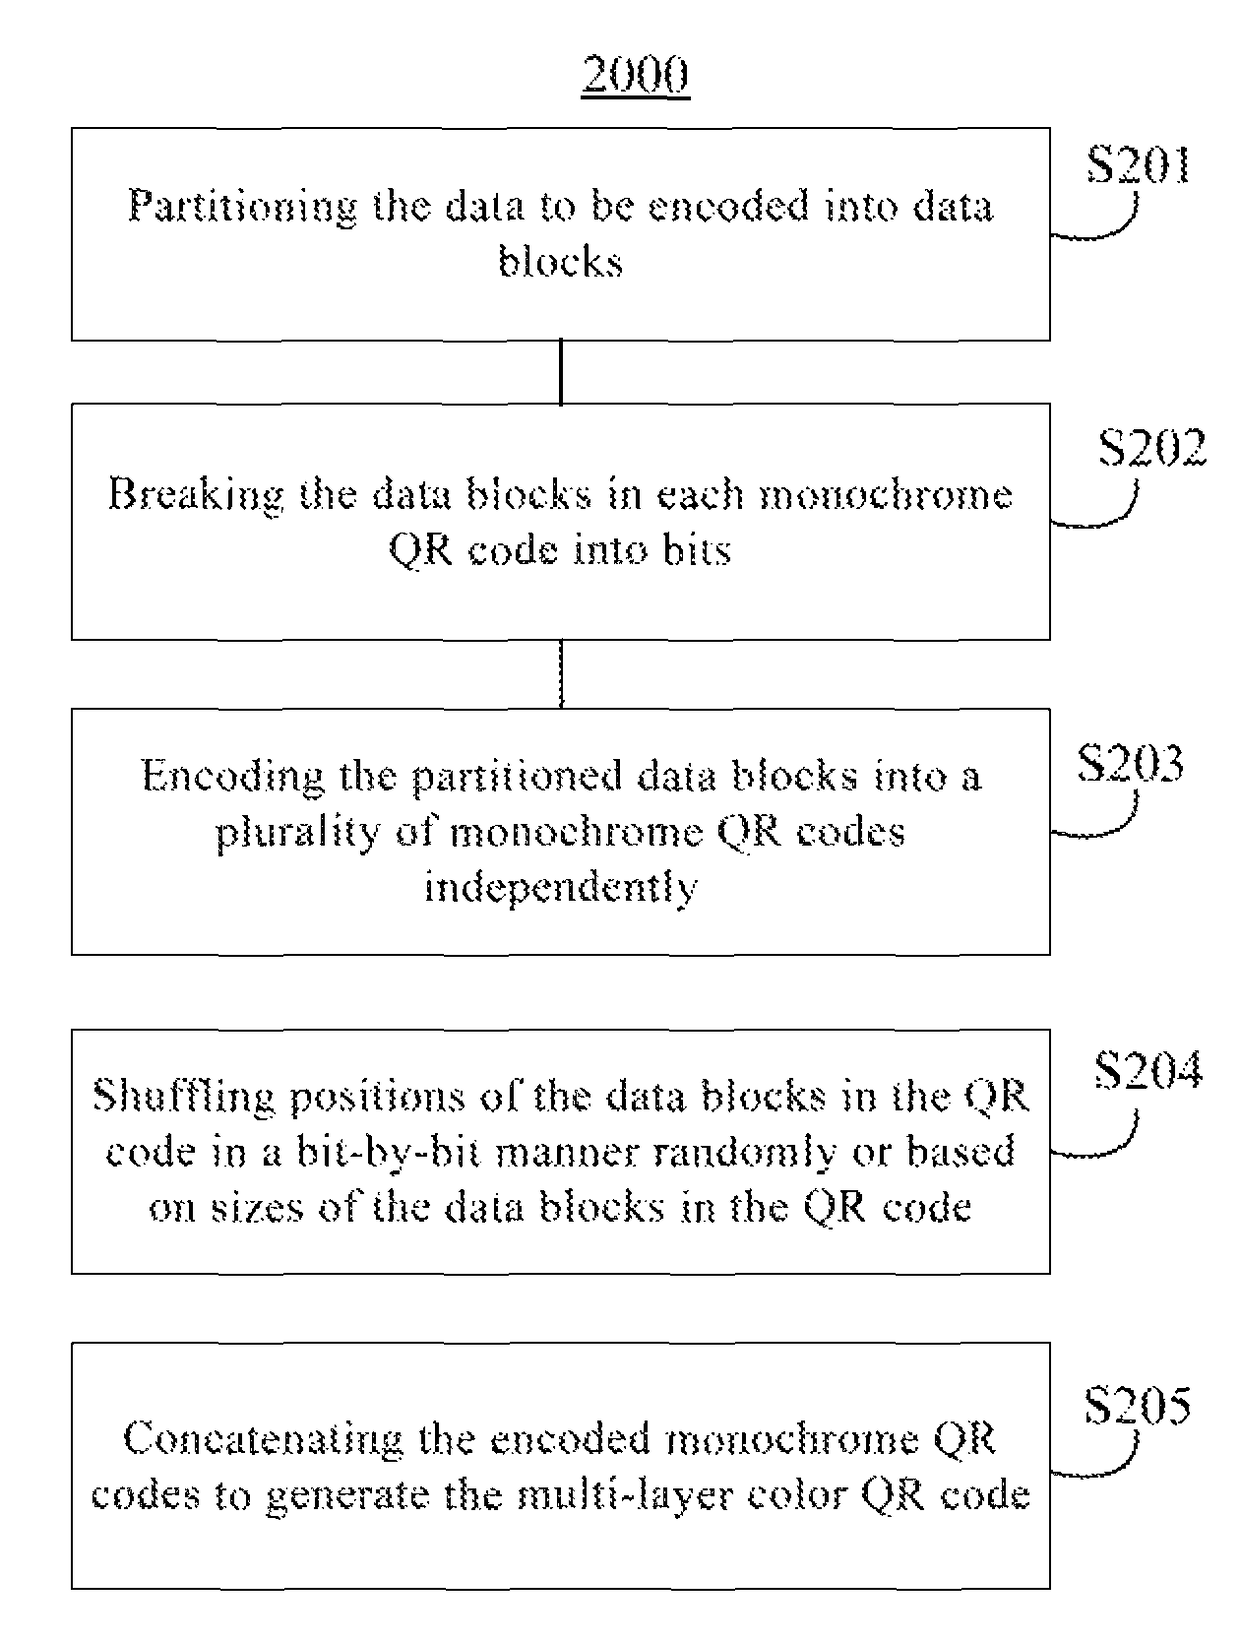 Method and apparatus for decoding or generating multi-layer color QR code, method for recommending setting parameters in generation of multi-layer QR code, and product comprising multi-layer color QR code